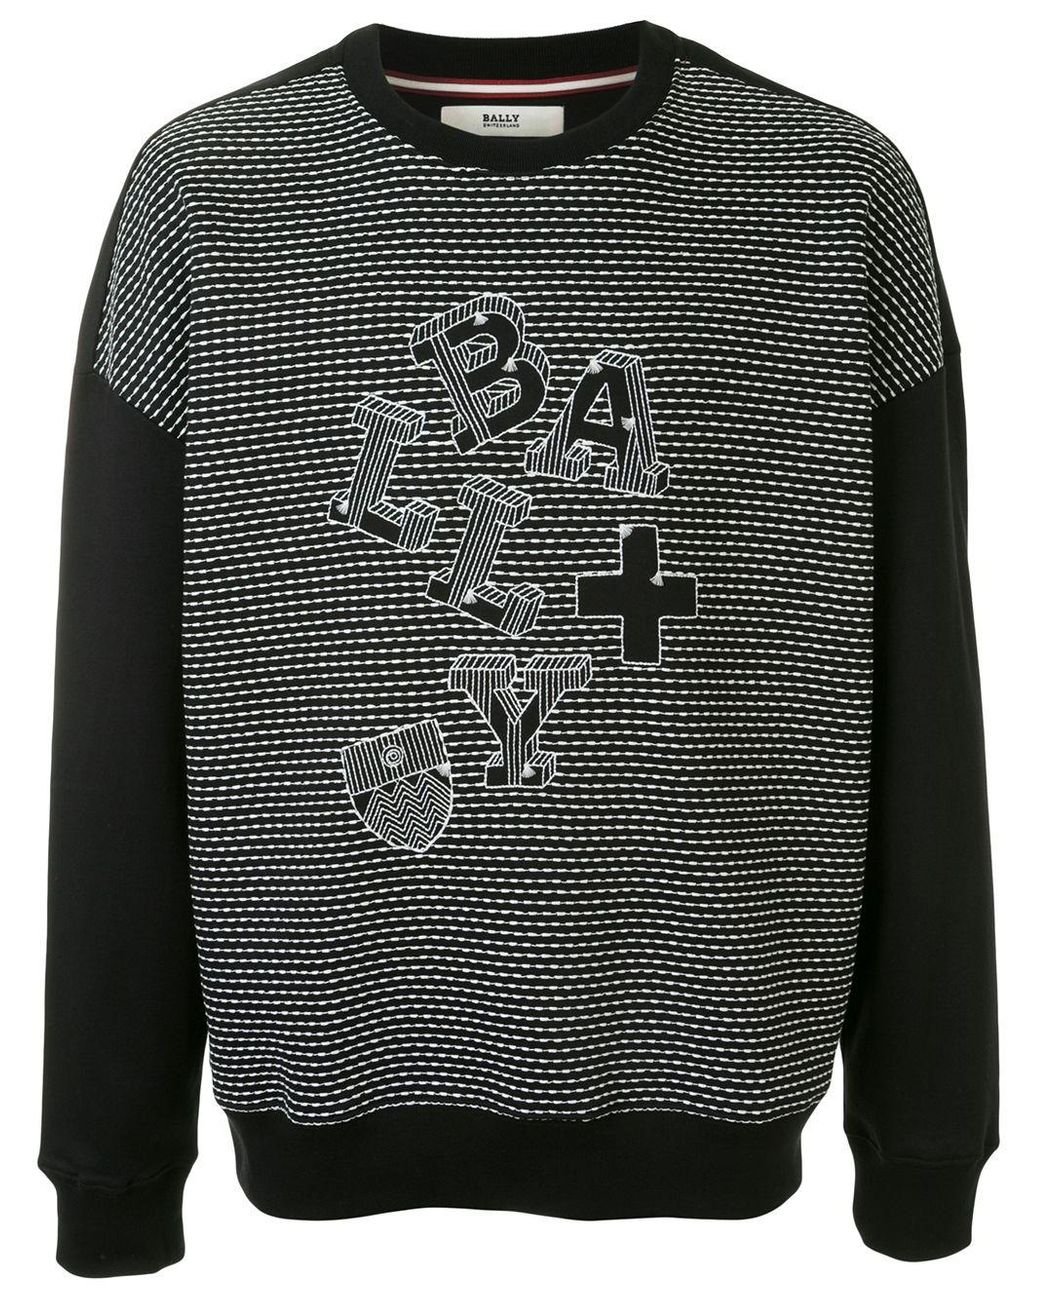 Bally Cotton Embroidered Sweatshirt in Black for Men - Lyst